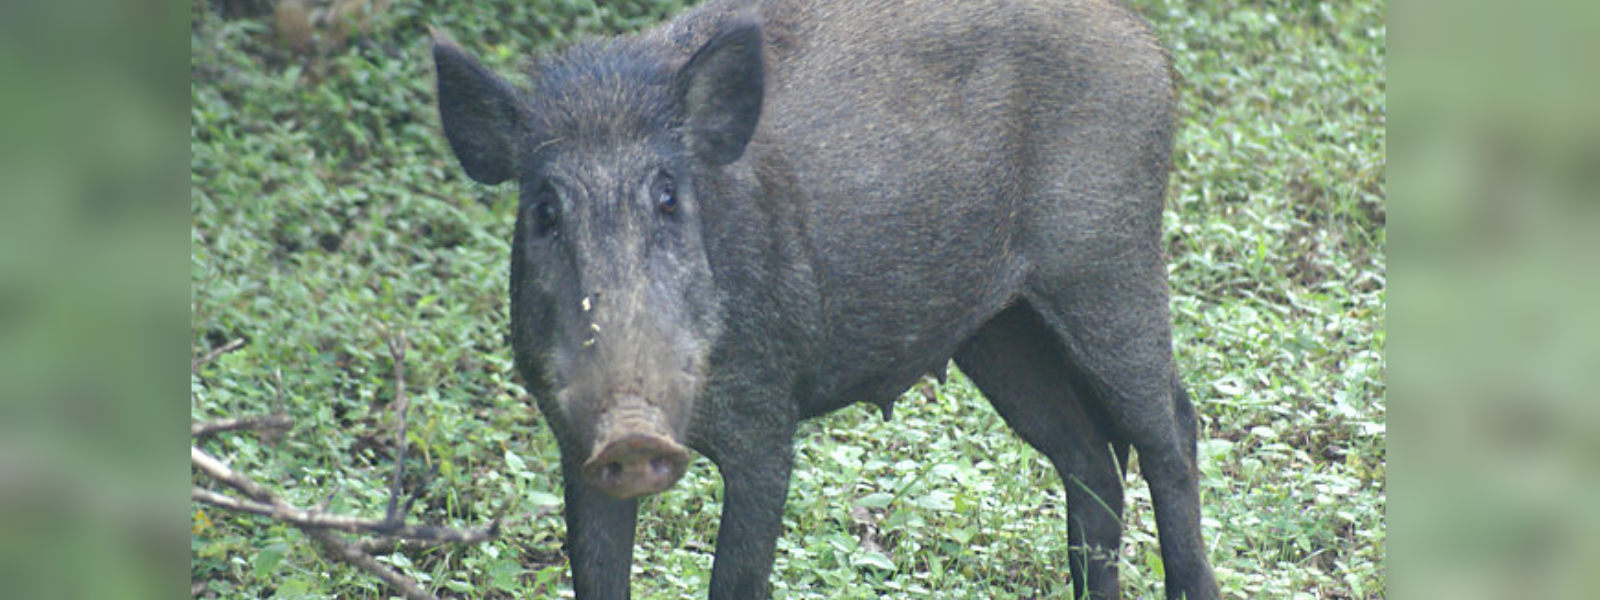 Plans to legalize sale of wild boar meat